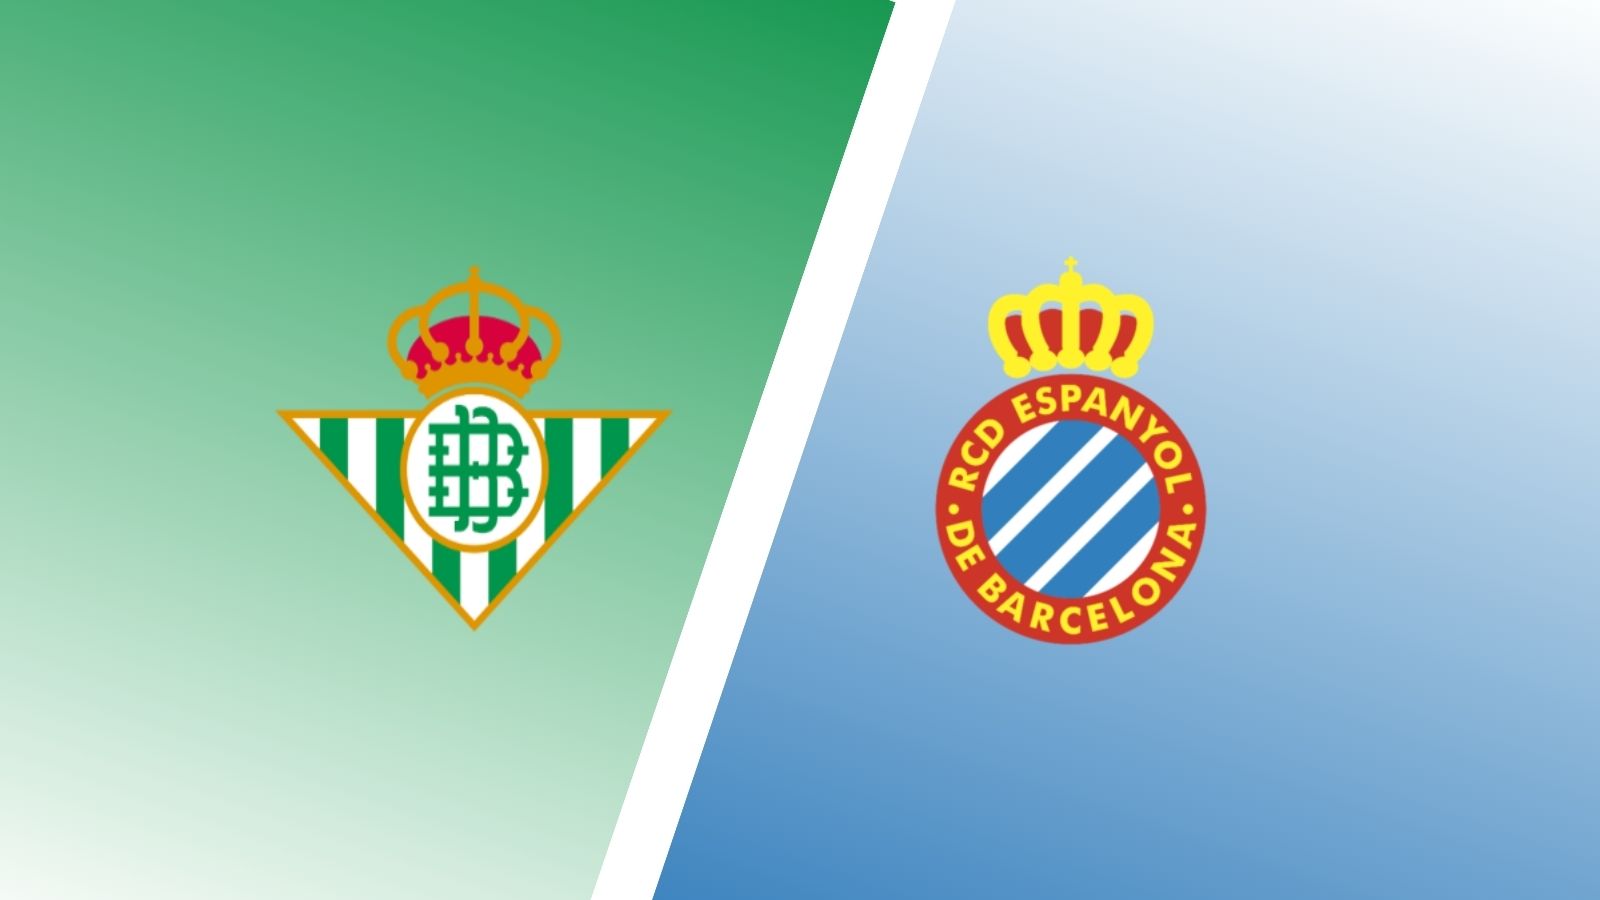 Real Betis vs Espanyol Predictions & Match Preview - Expert